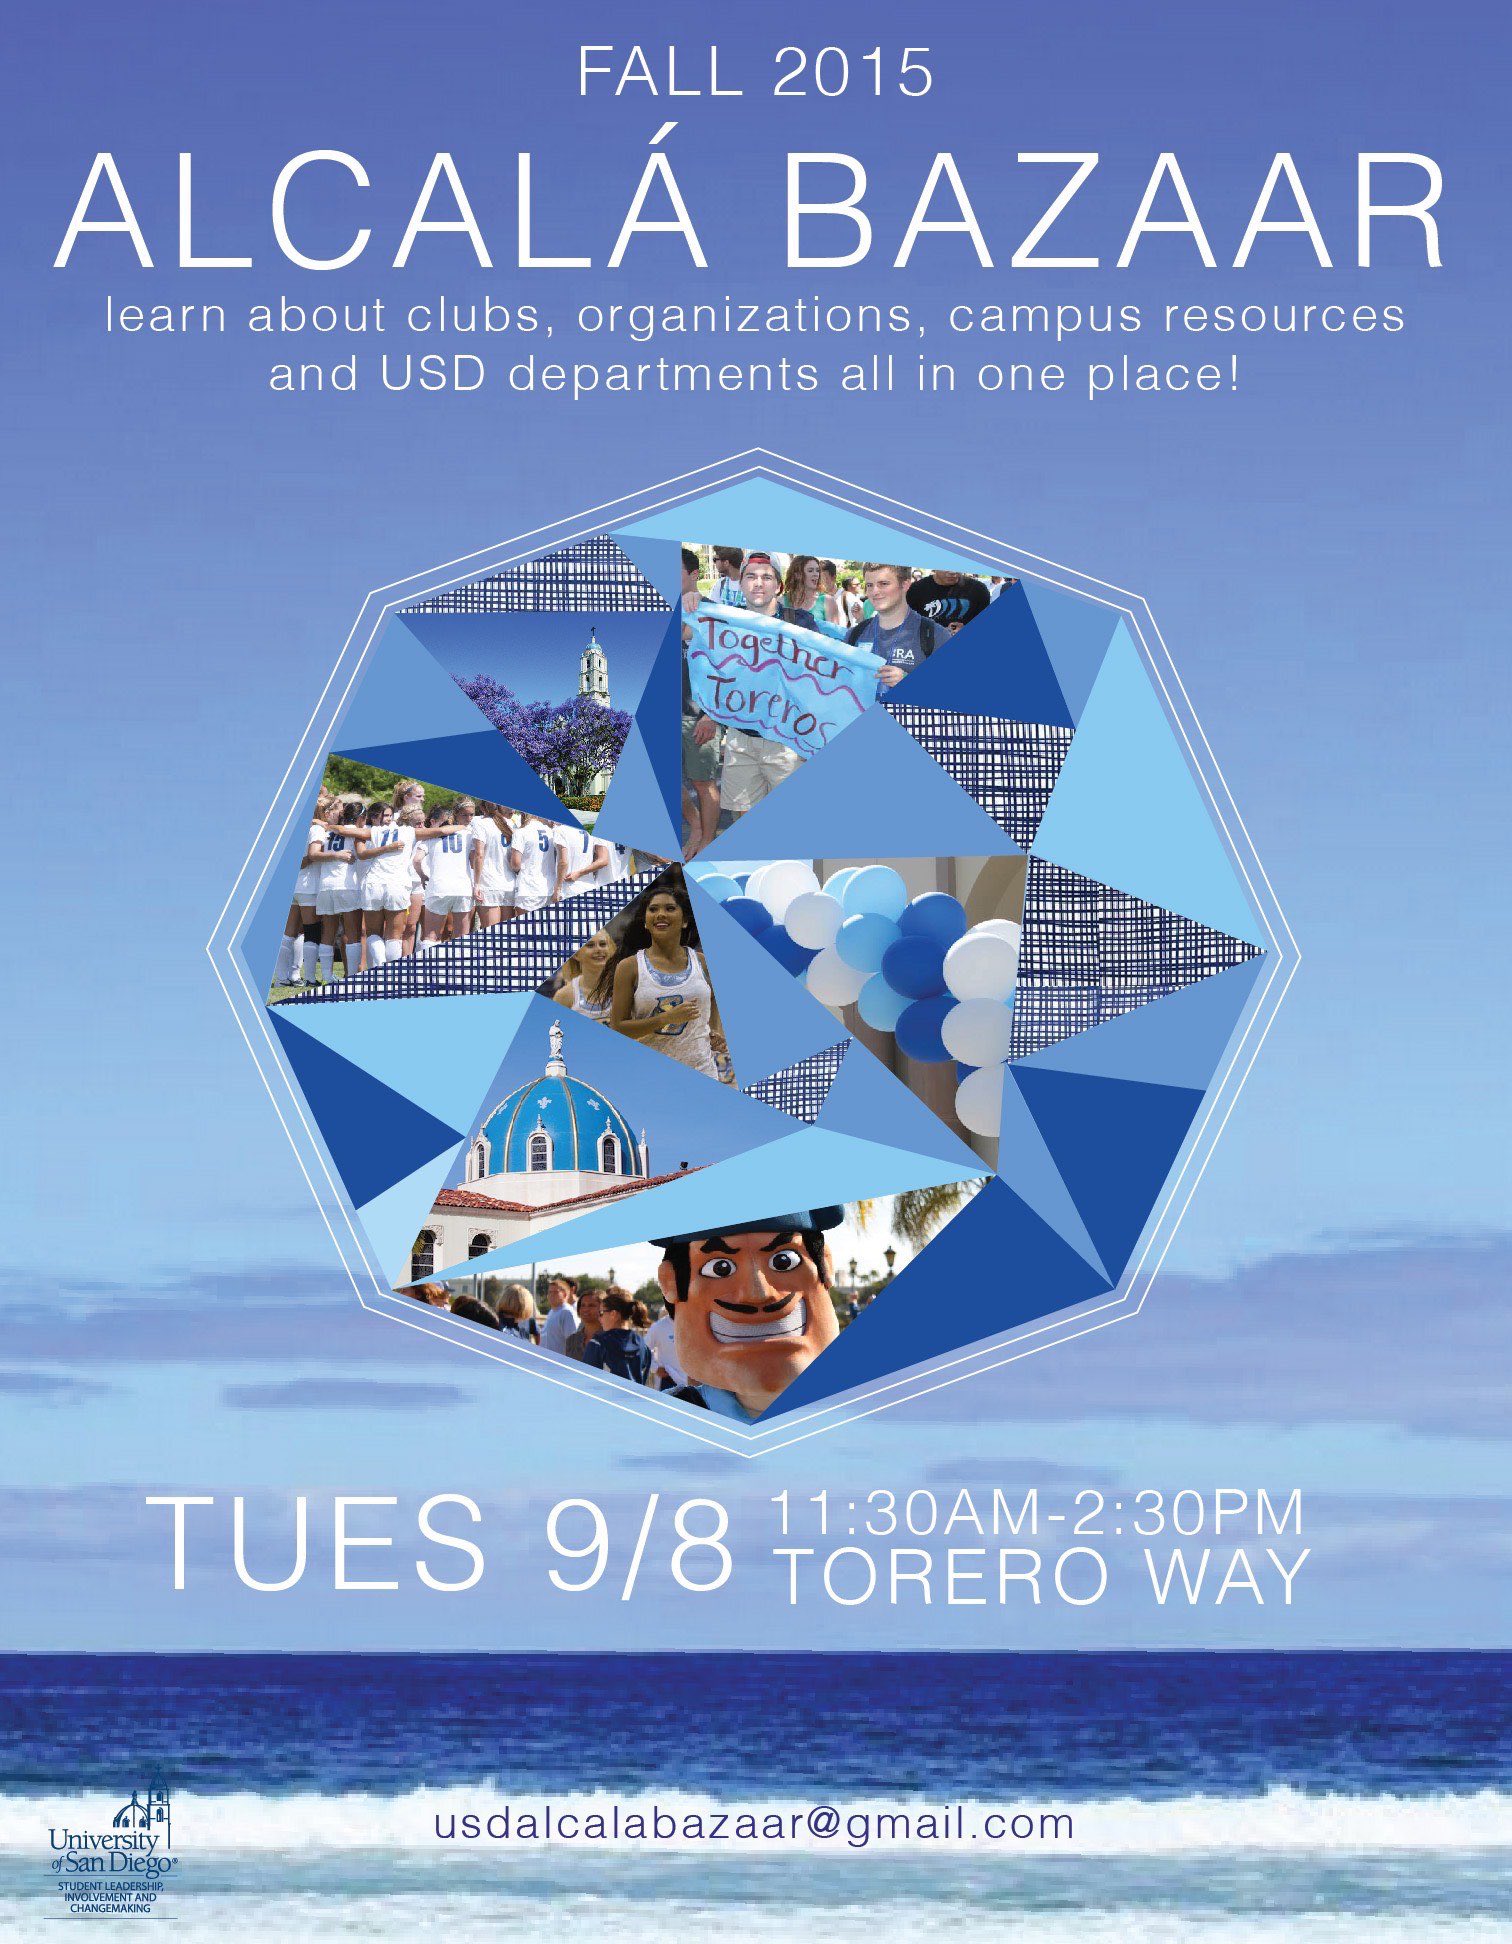 Come to the Alcala Bazaar for Fall 2015!